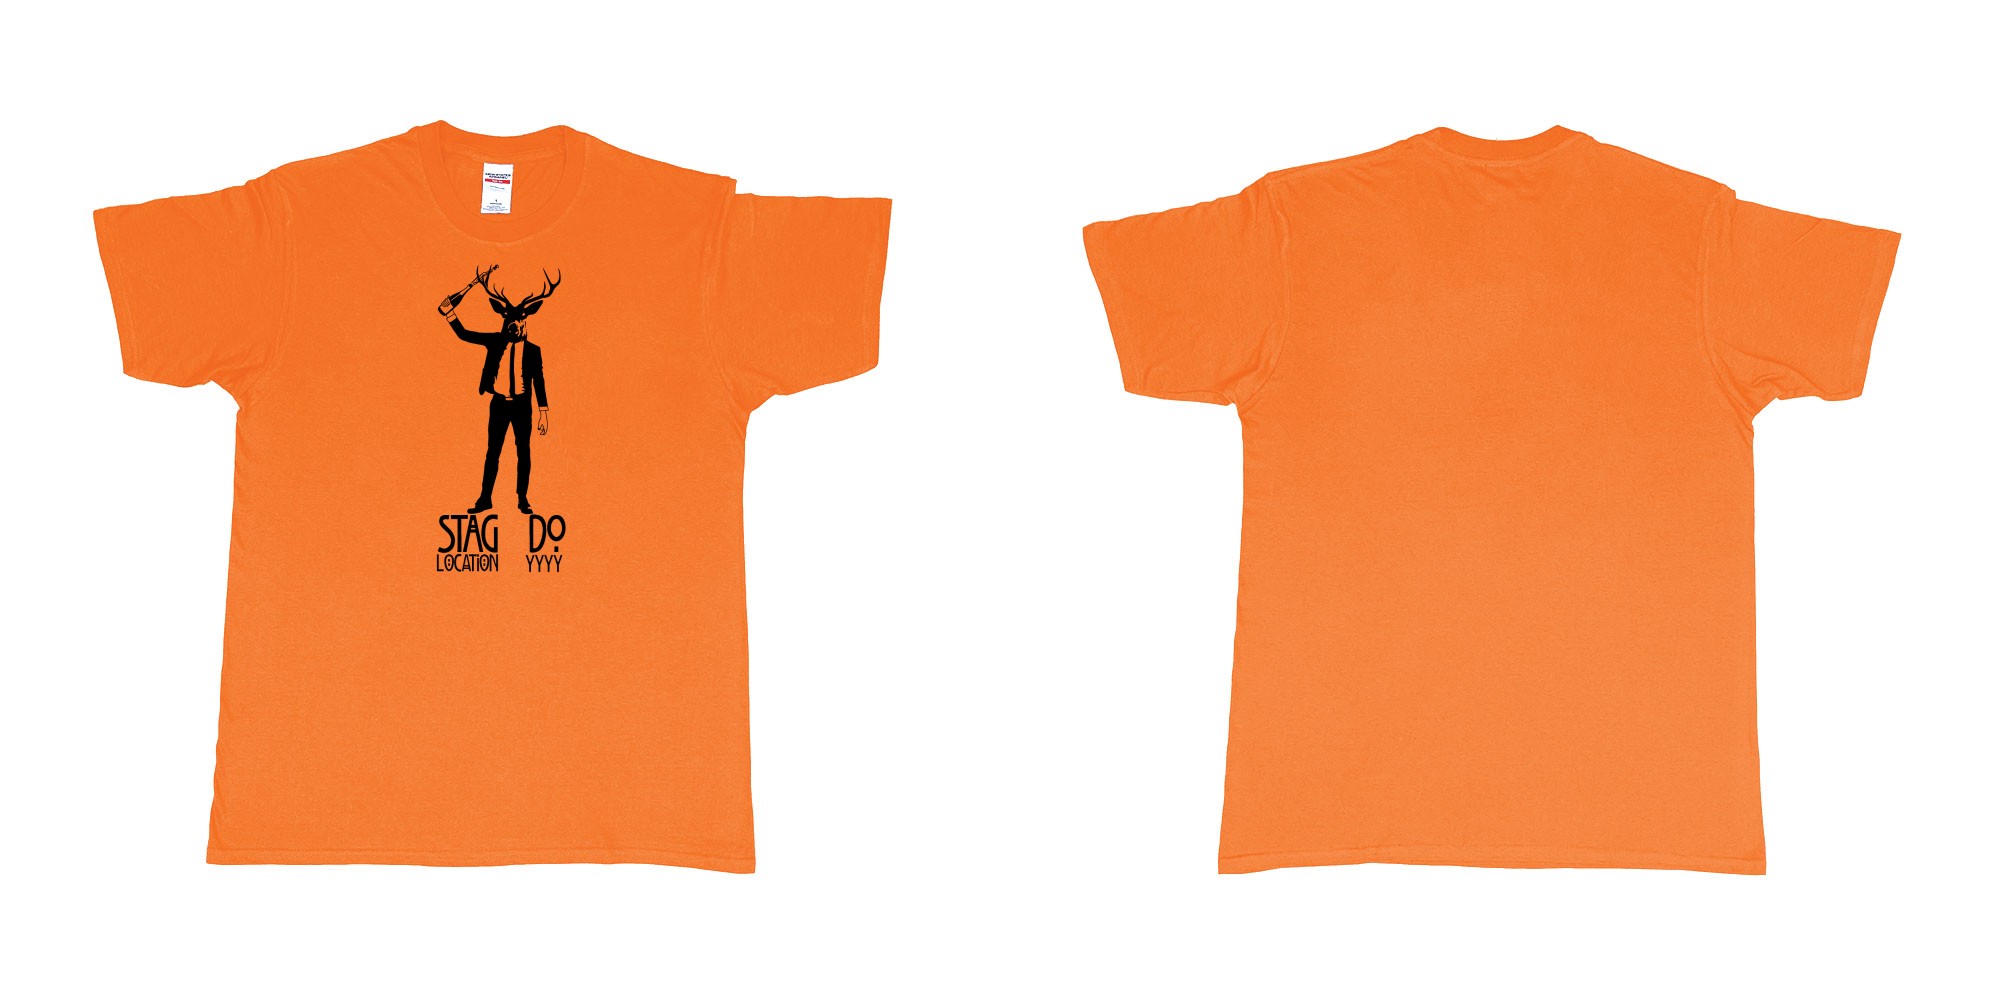 Custom tshirt design stag business man champagne in fabric color orange choice your own text made in Bali by The Pirate Way